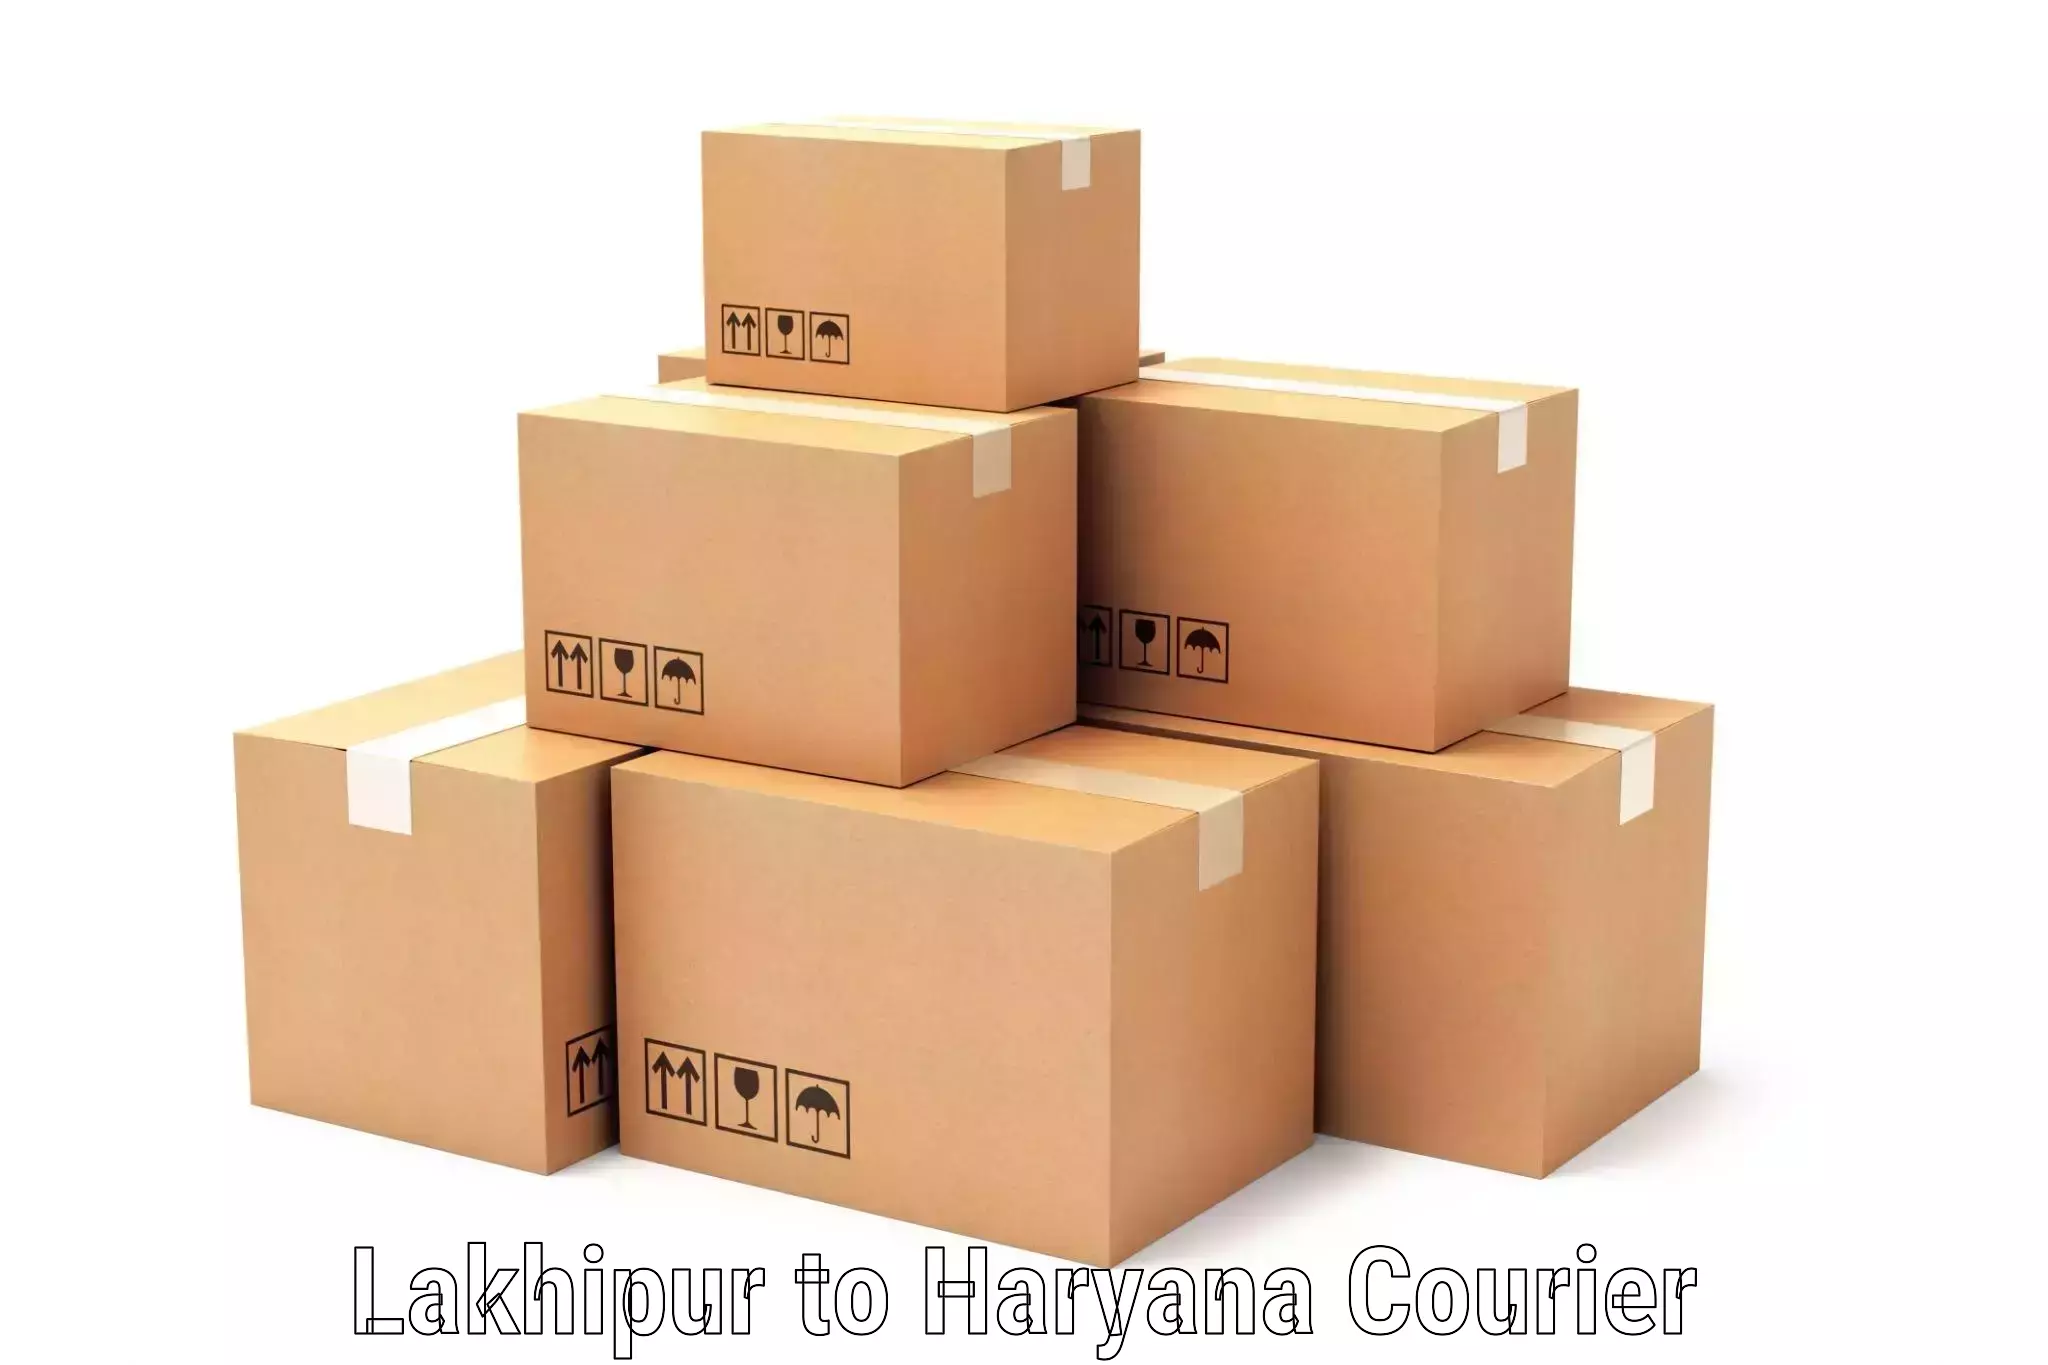 Customized shipping options Lakhipur to Sonipat